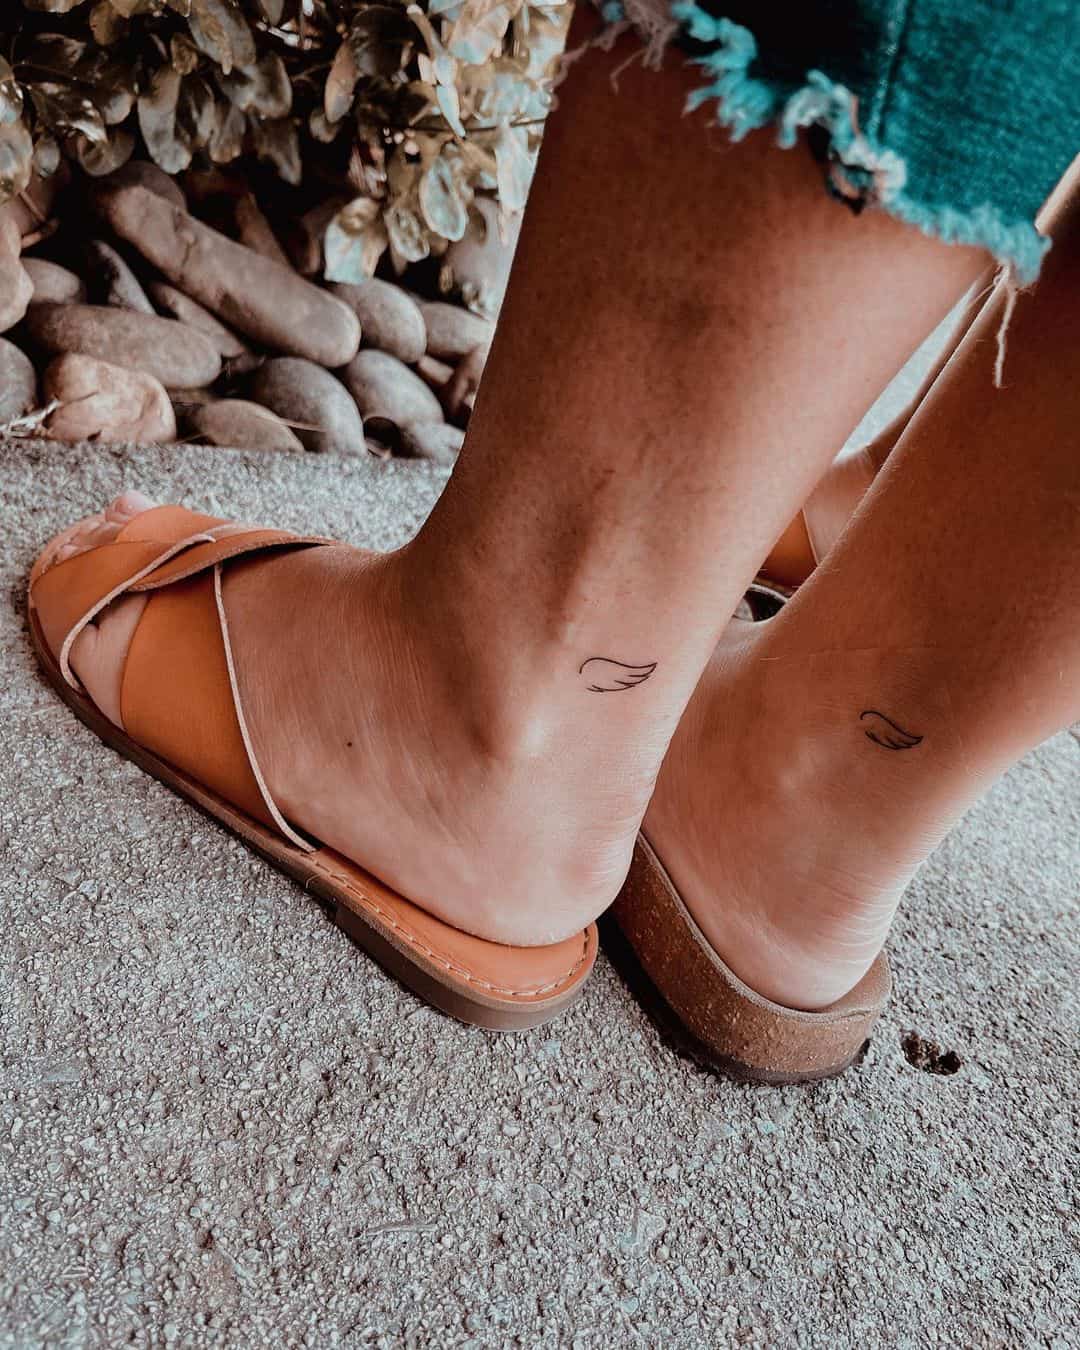 Delicately Inked Minimalistic Fine Line Tattoos by Tiny Tattoo Queen